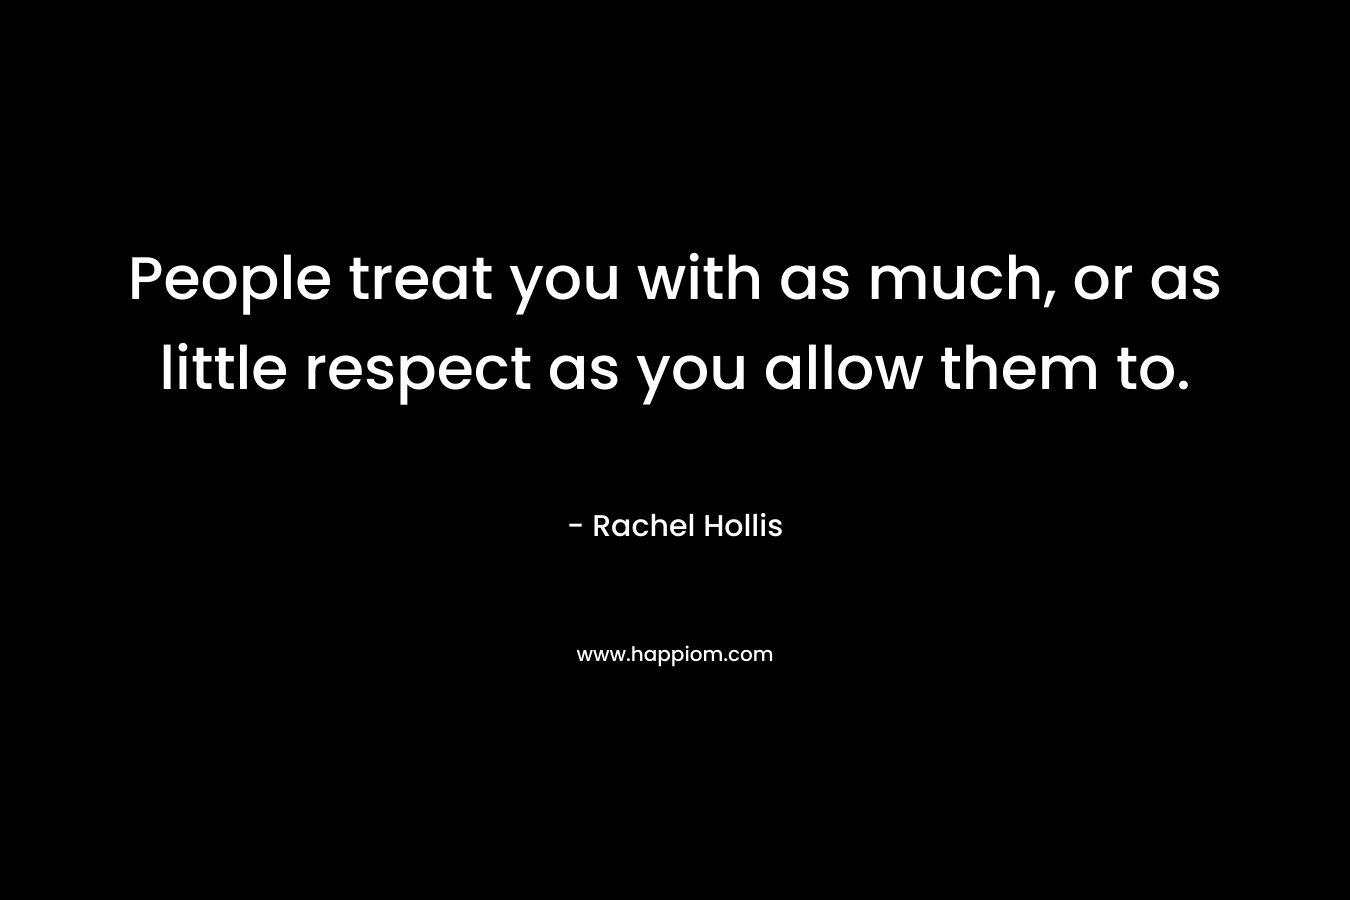 People treat you with as much, or as little respect as you allow them to. – Rachel Hollis